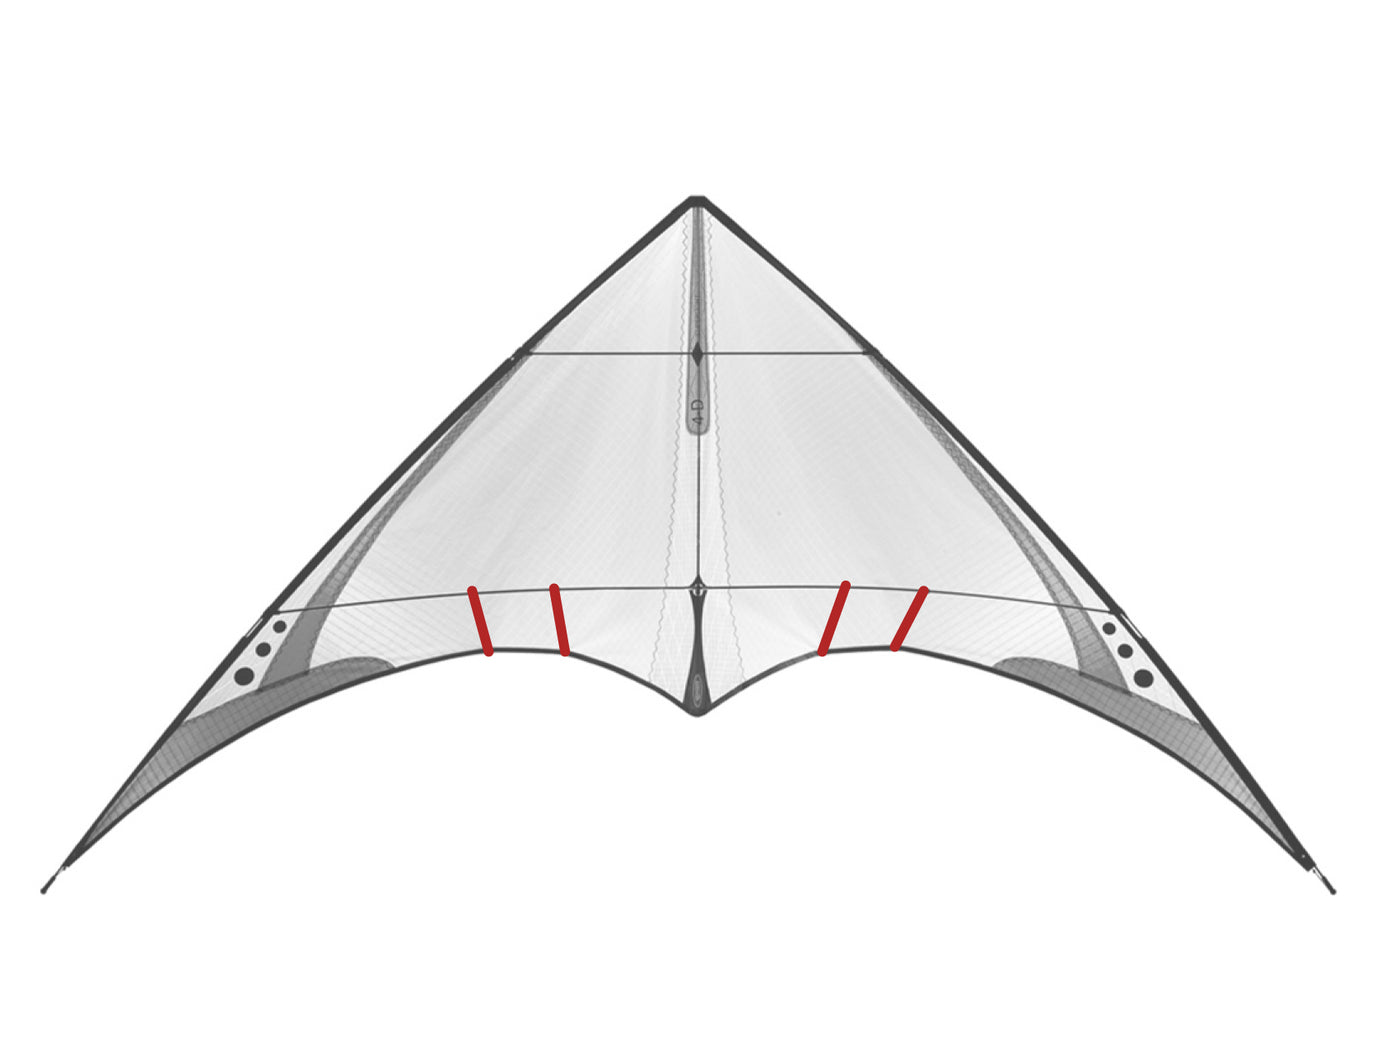 Diagram showing location of the 4-D Standoffs on the kite.